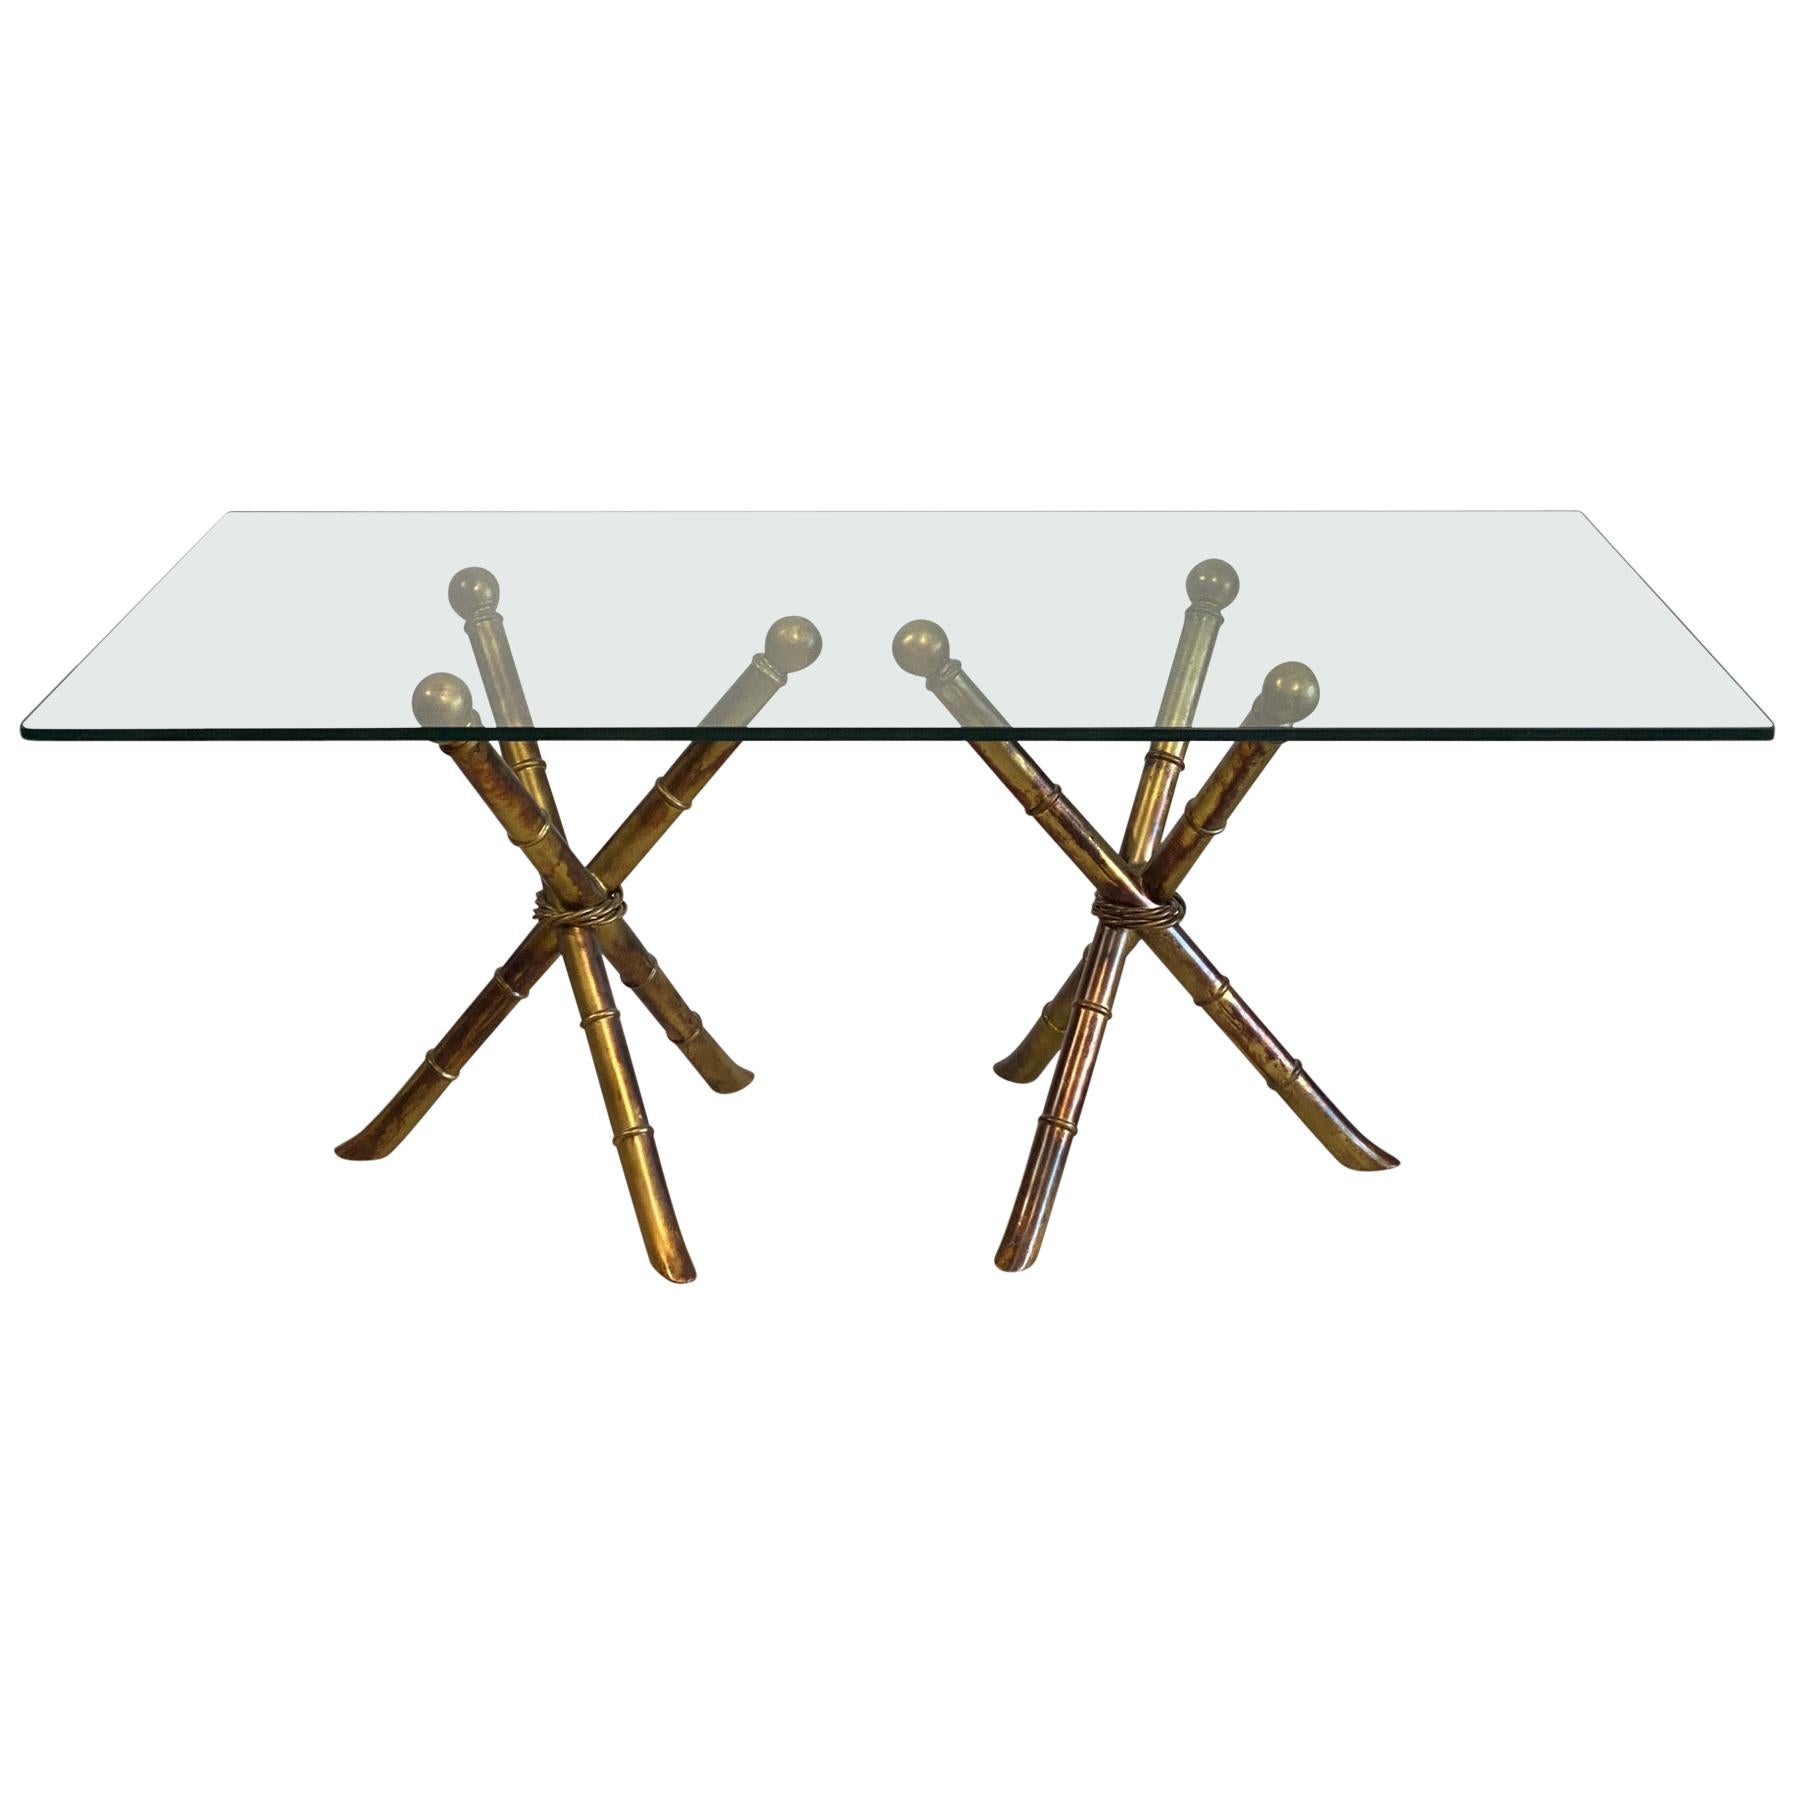 Faux Bamboo Painted Metal Dining Table with Glass Top